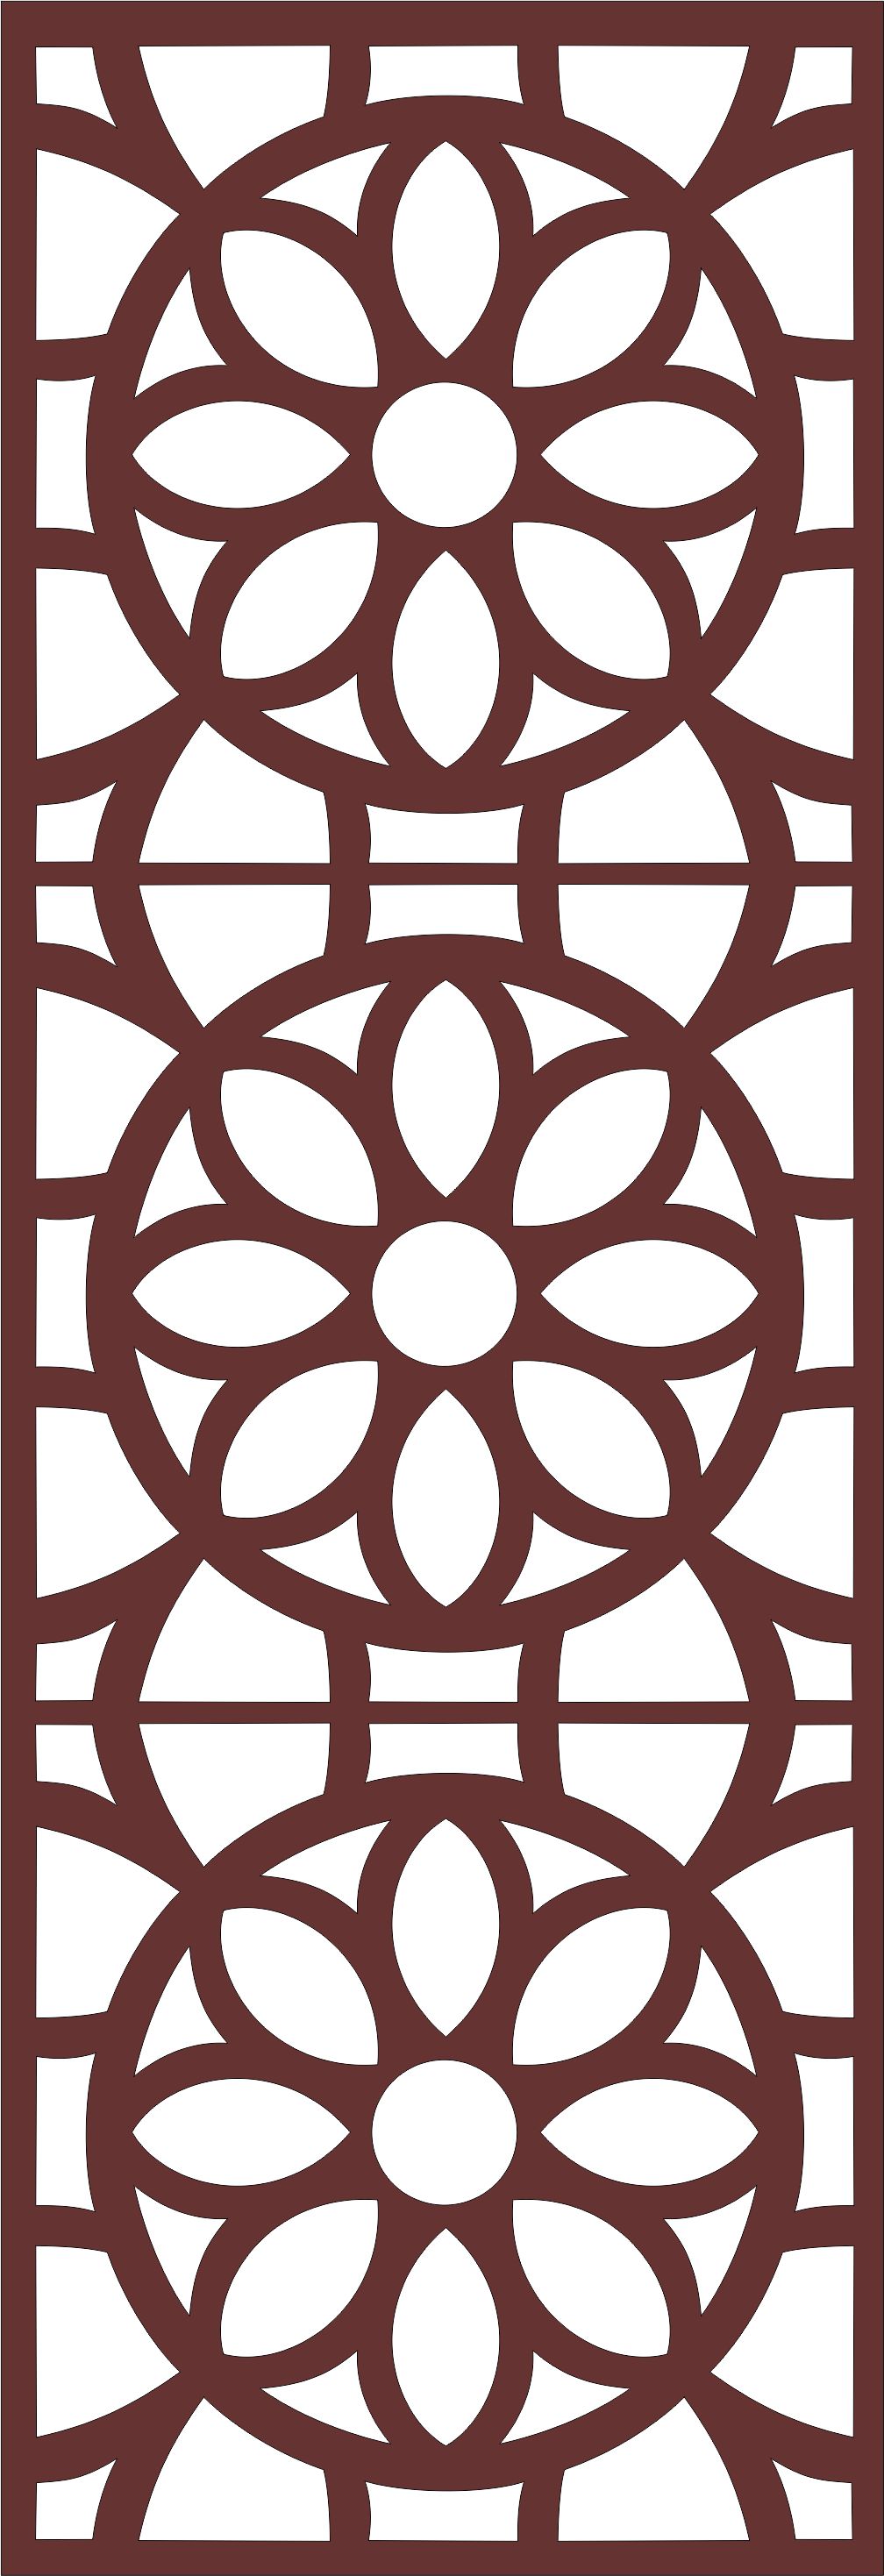 Laser Cut Drawing Room Grill Floral Seamless Design Free CDR Vectors Art